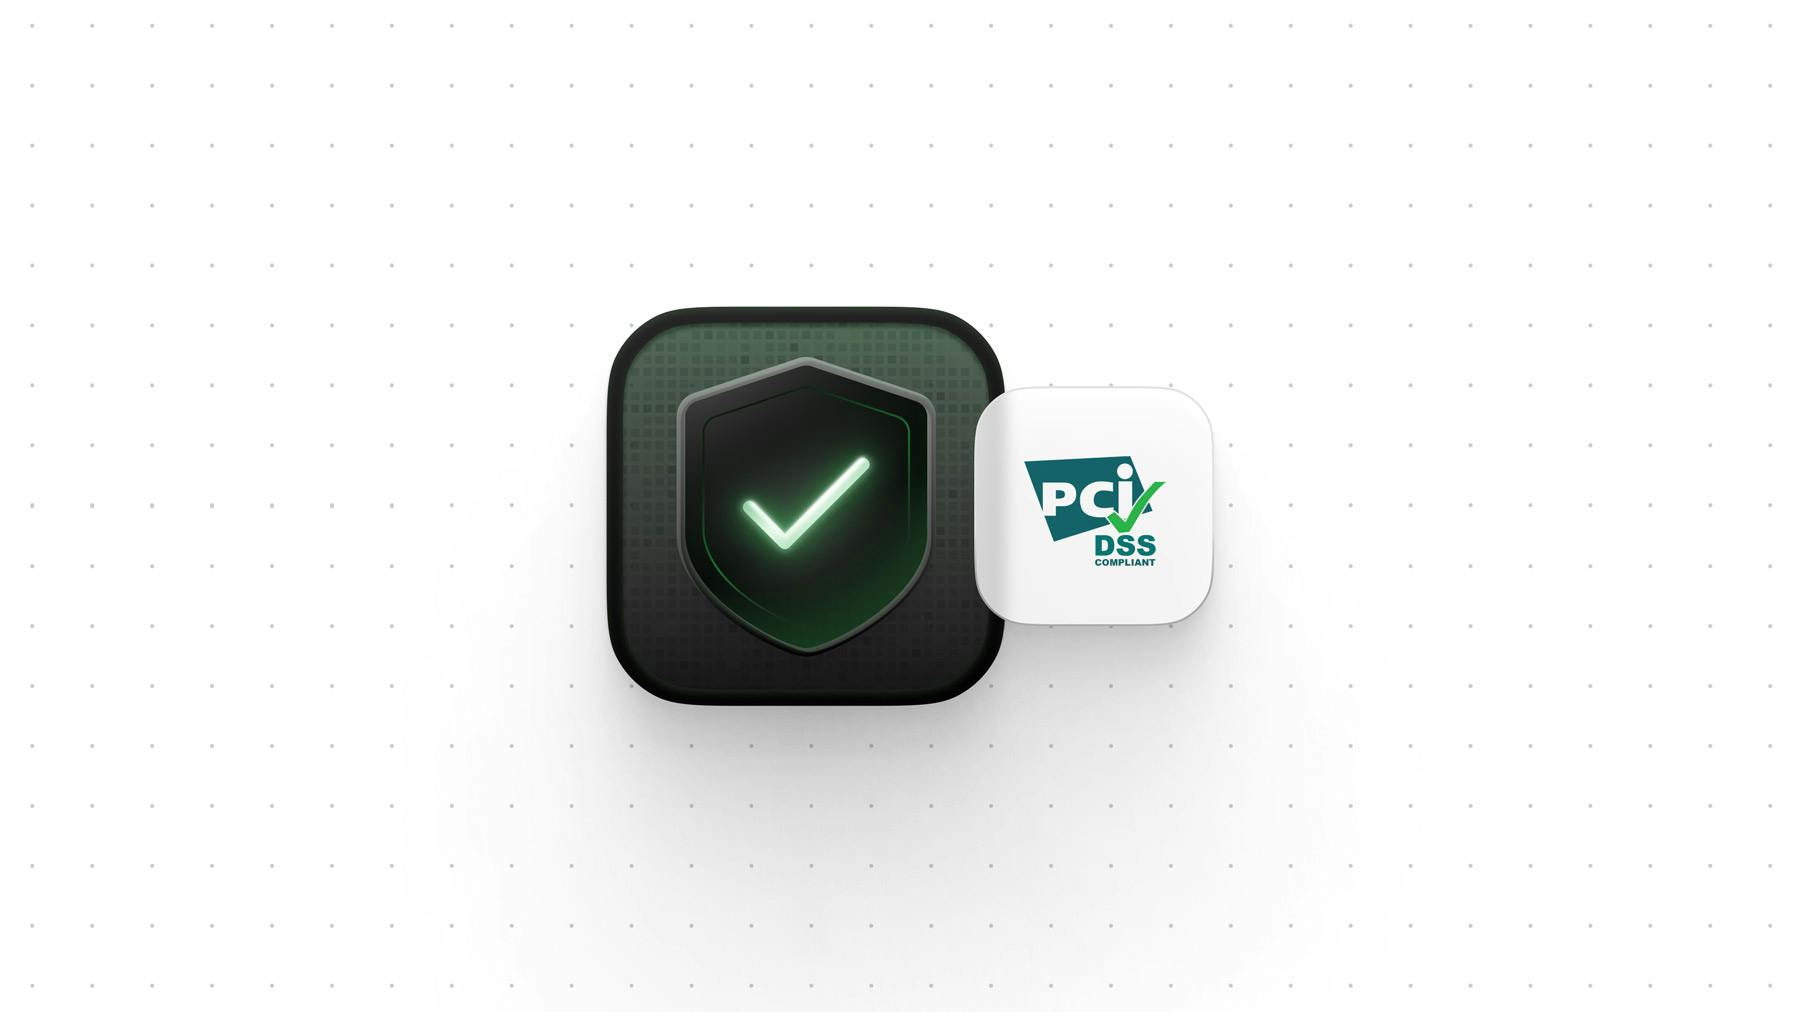 PlanetScale Managed is now PCI compliant